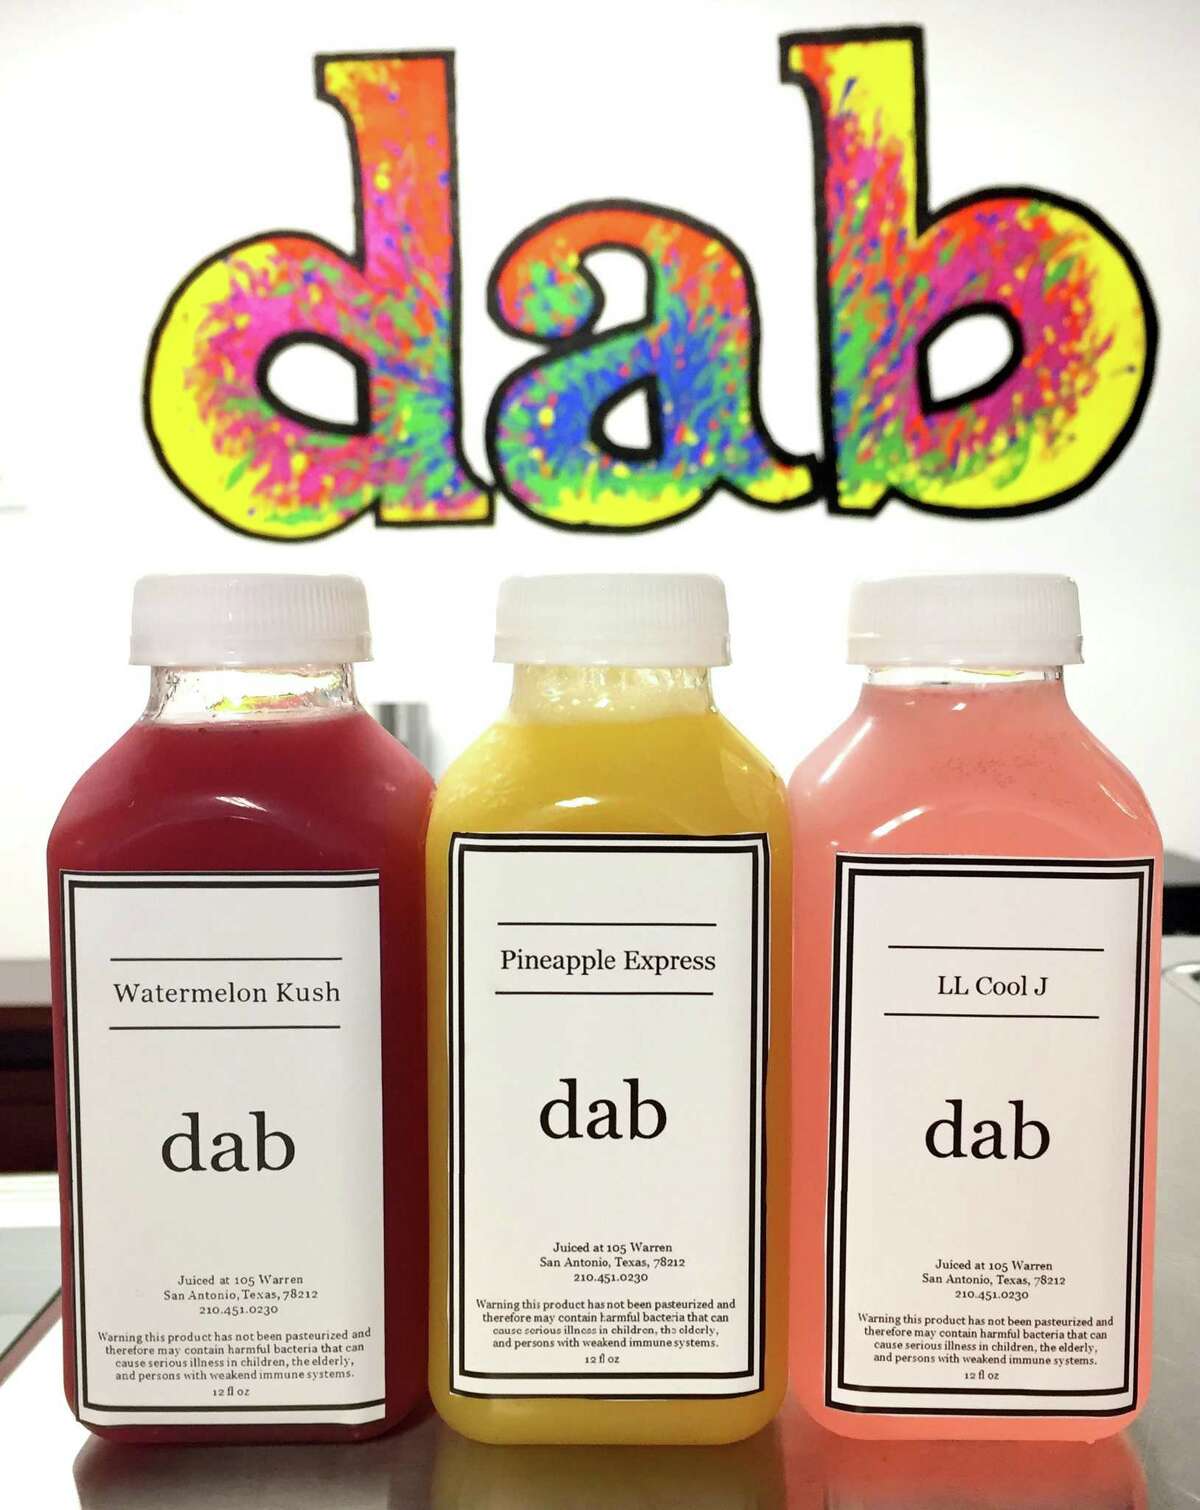 Customers can choose to add CBD oil to any of the fresh juices served at Dab Hemp Cafe.